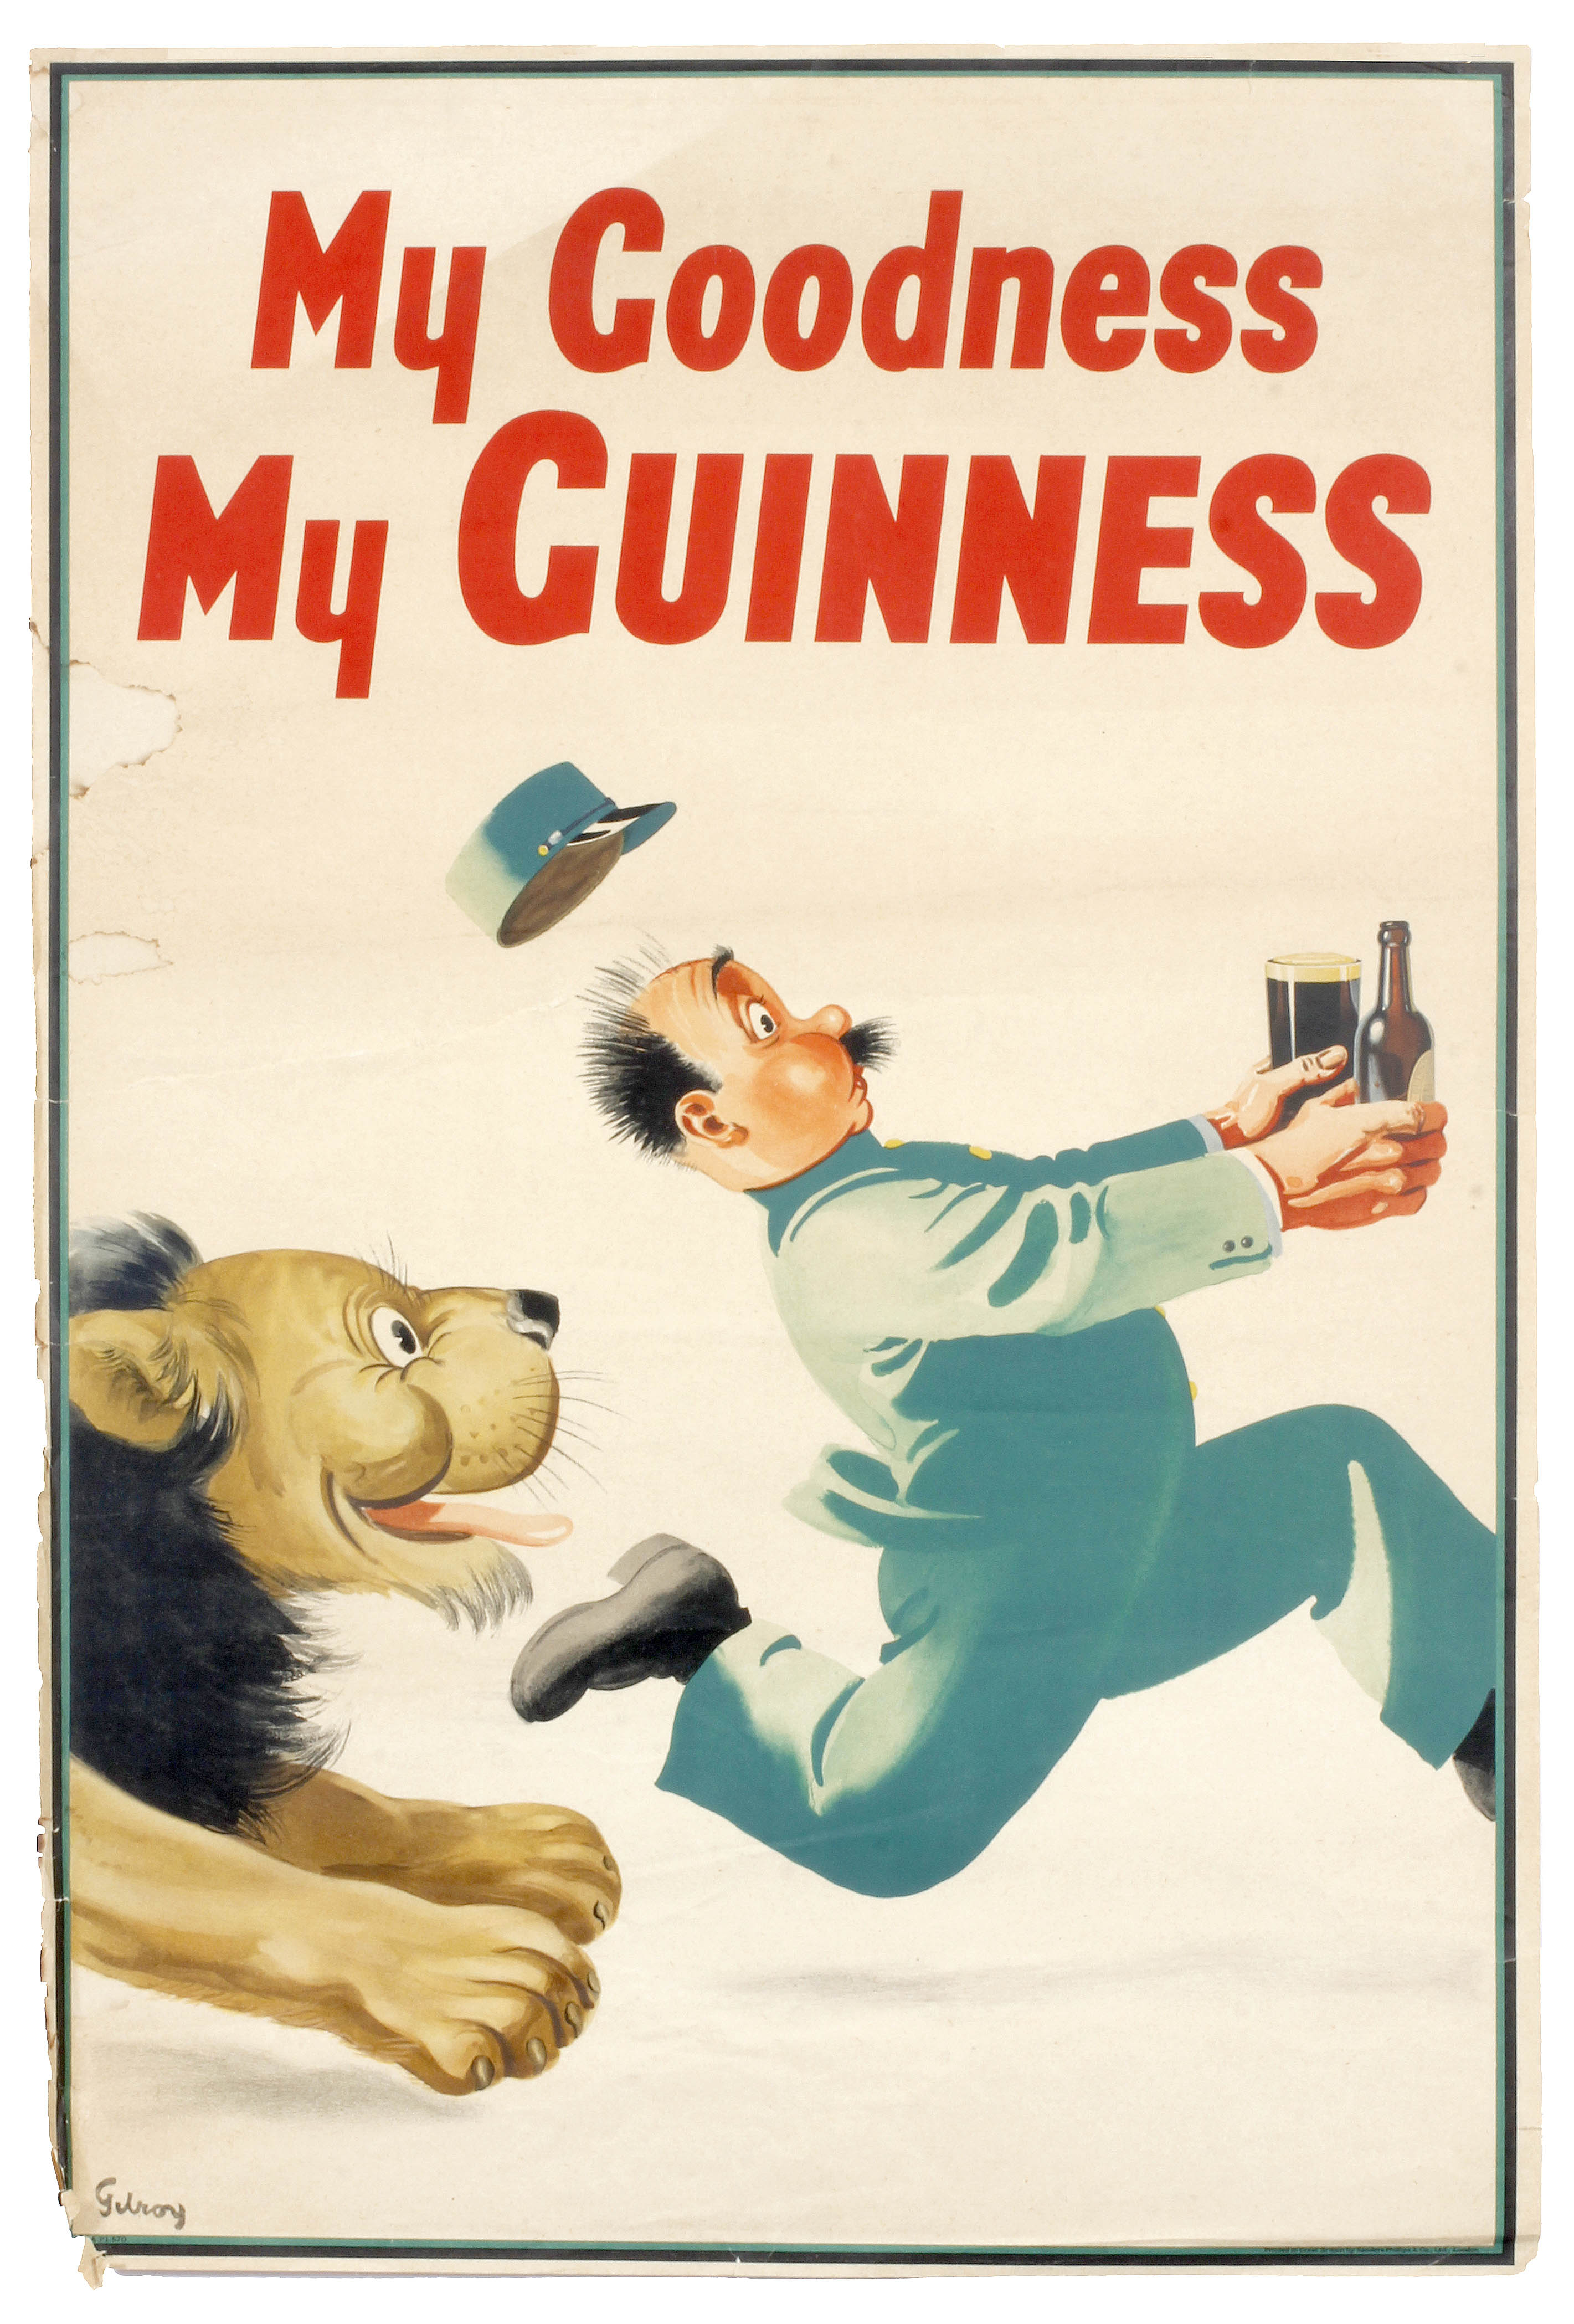 A GUINNESS ADVERTISING POSTER by John Gilroy (1898 - 1985) 'My Goodness, My Guinness' with a lion